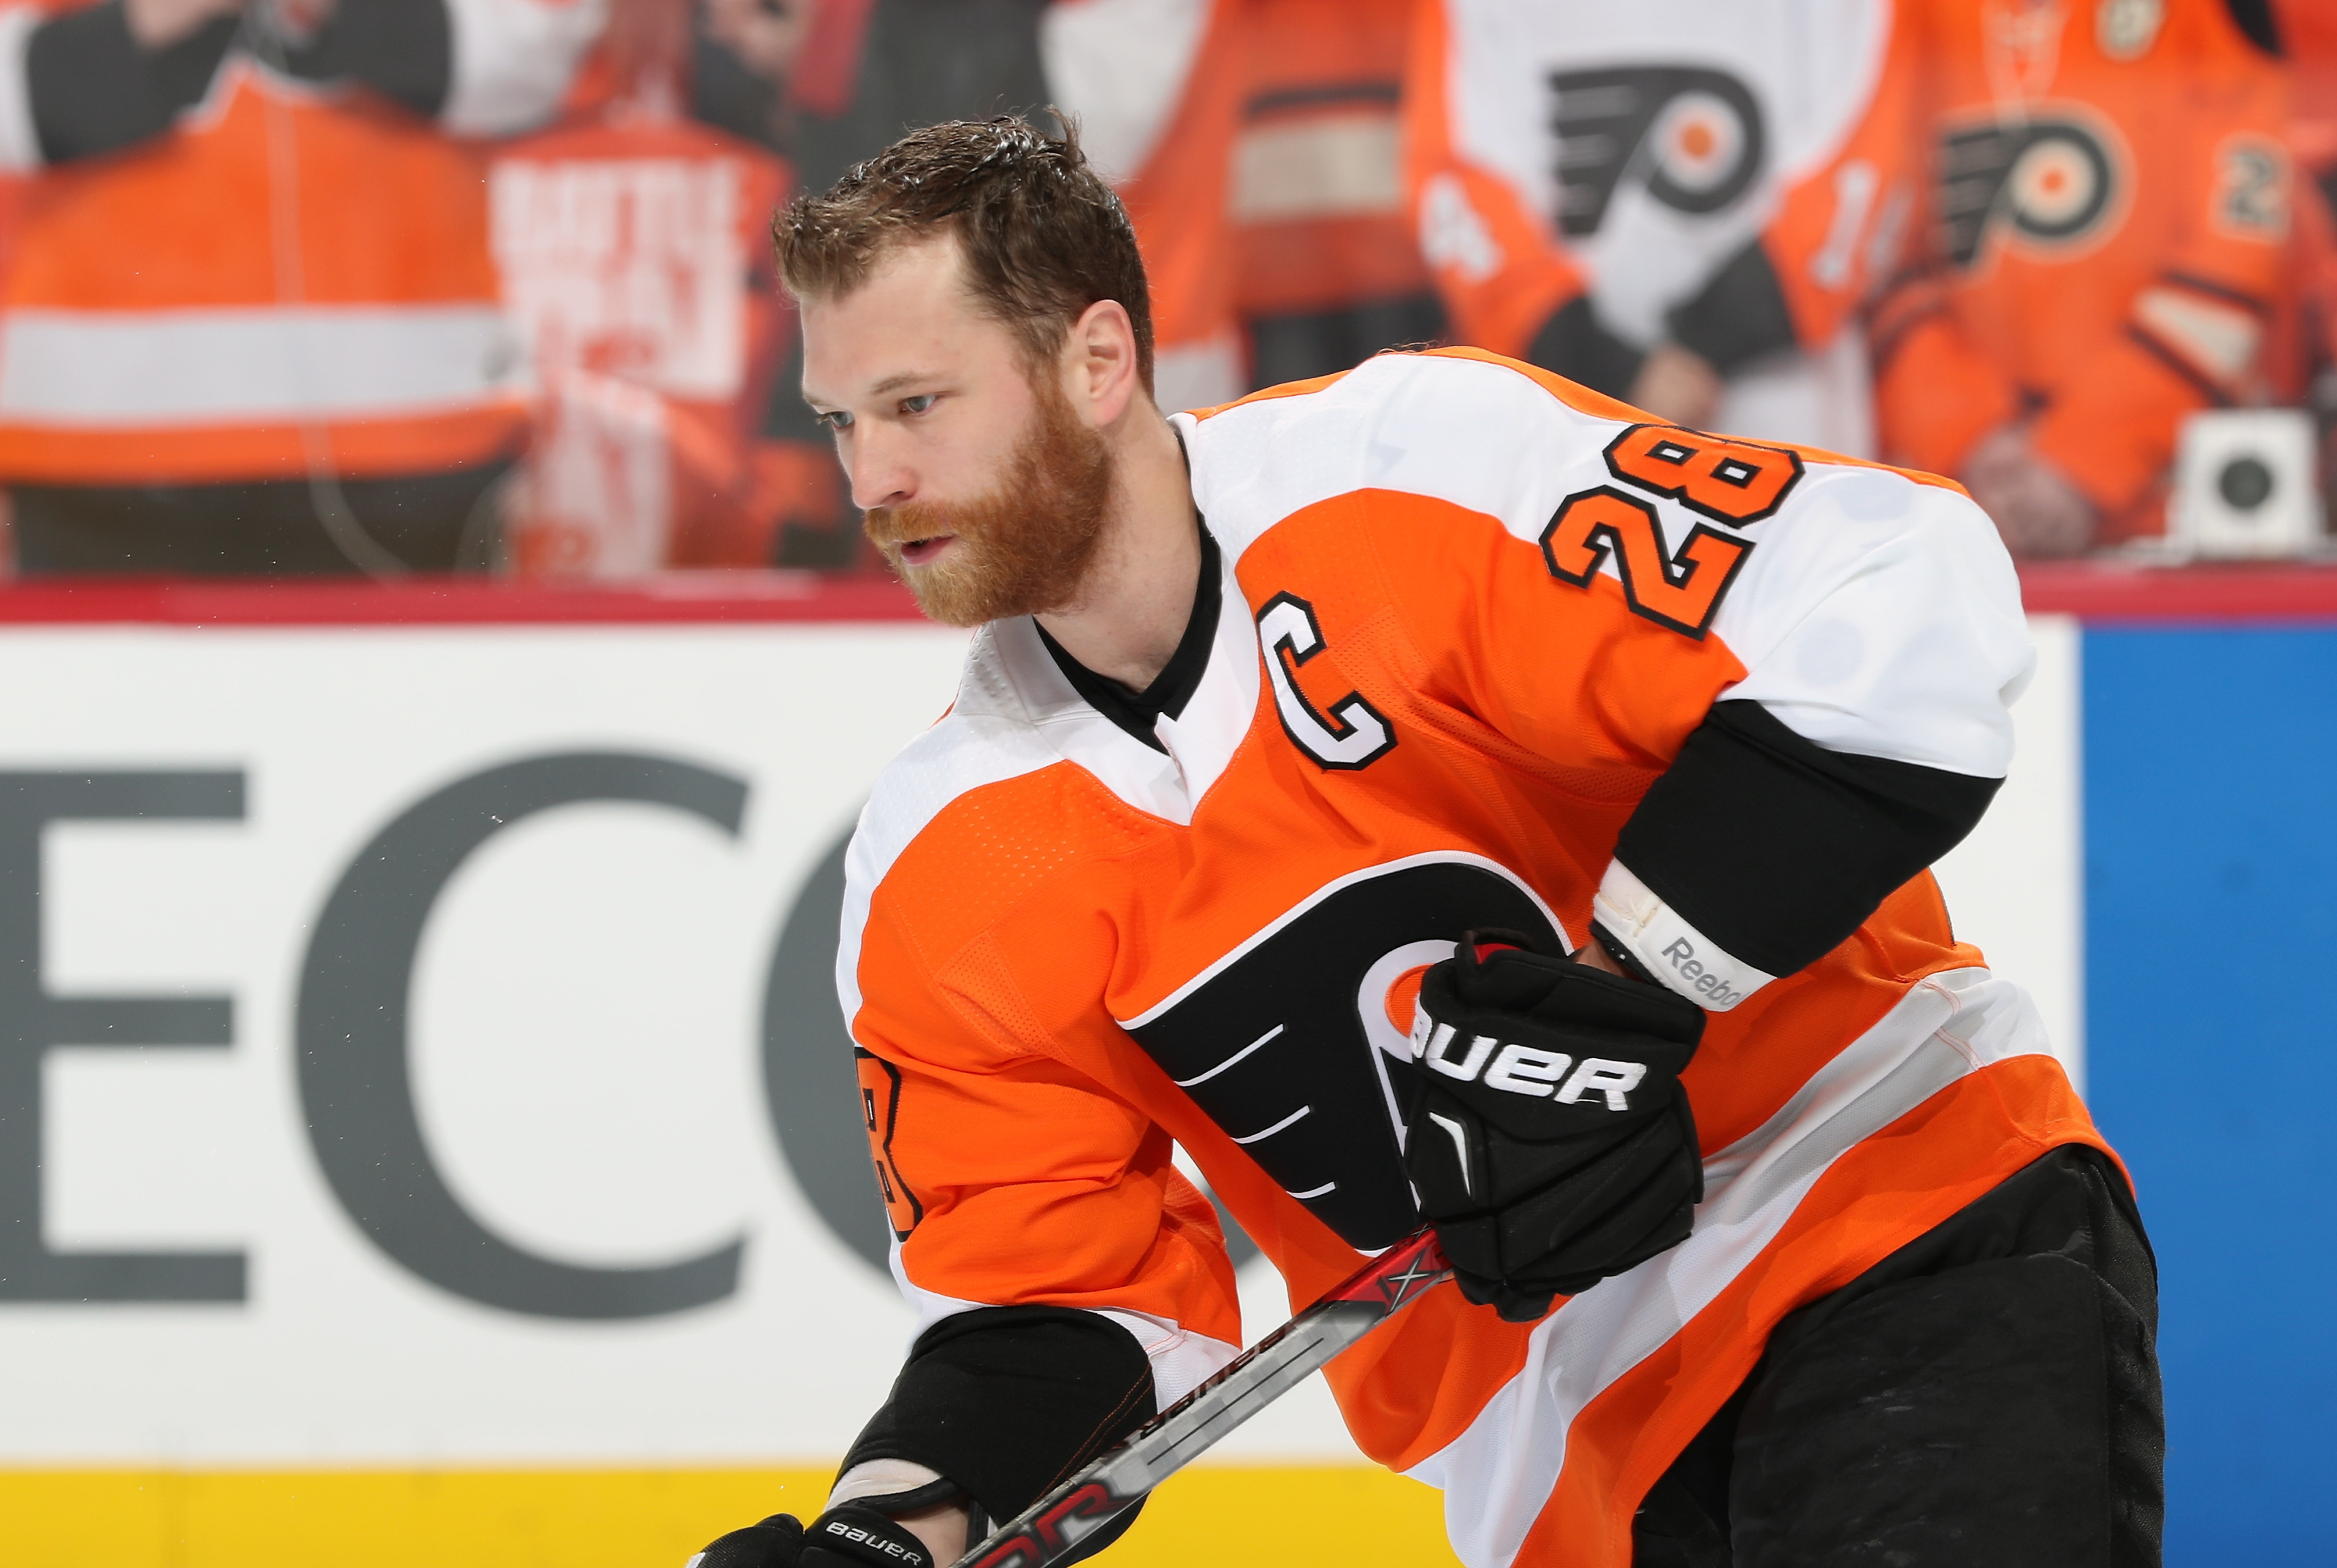 Flyers' Claude Giroux: 'When the puck's not going in, you get